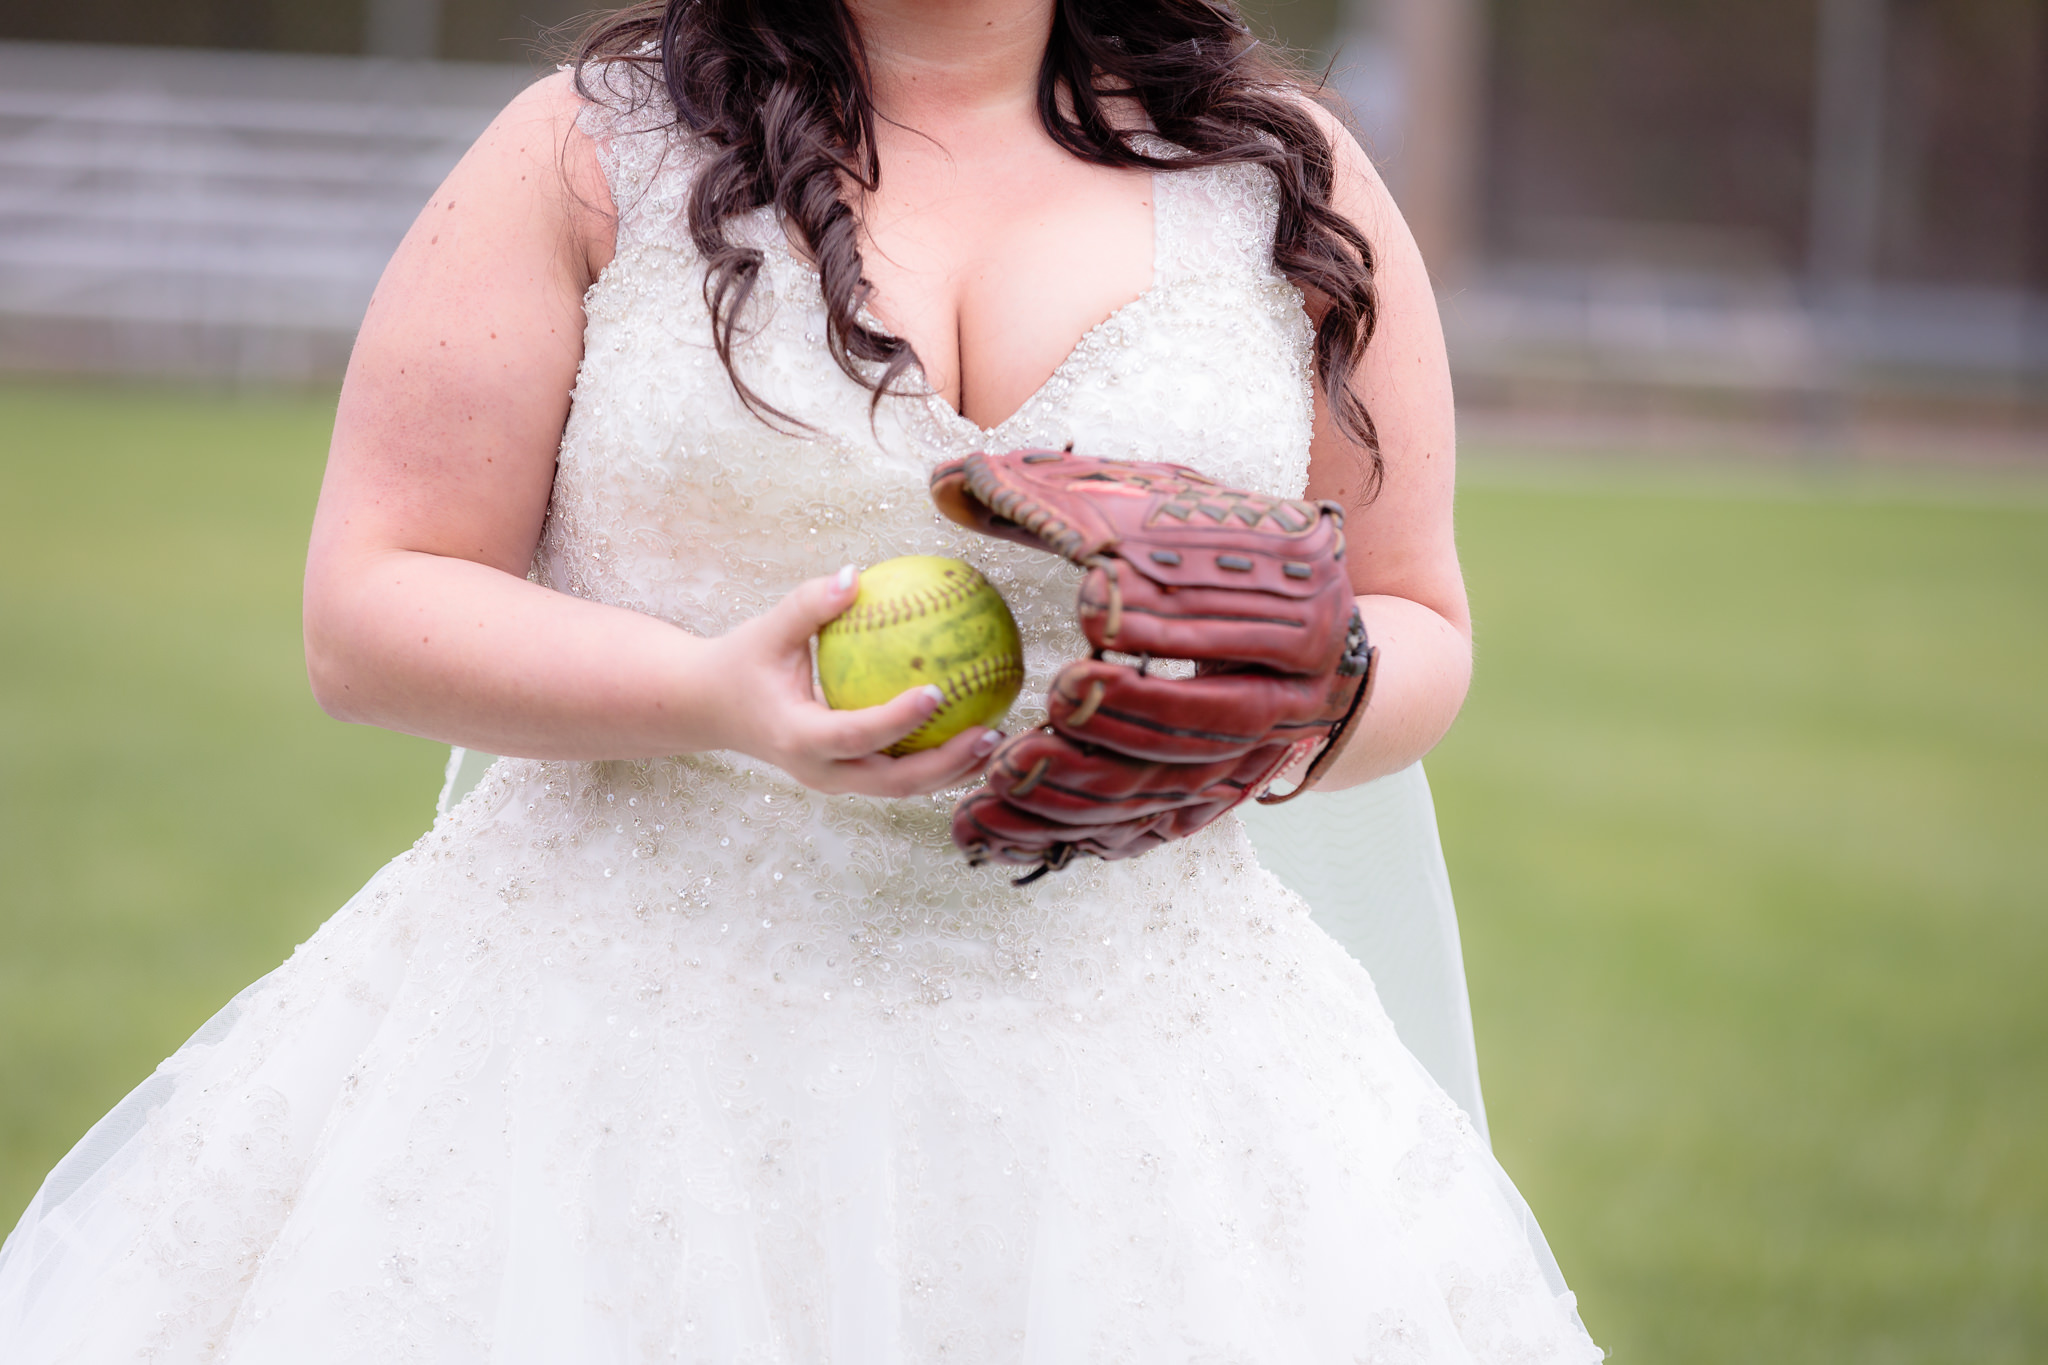 Bride tosses a yellow softball into her glove at the Robinson Township Girls Softball field